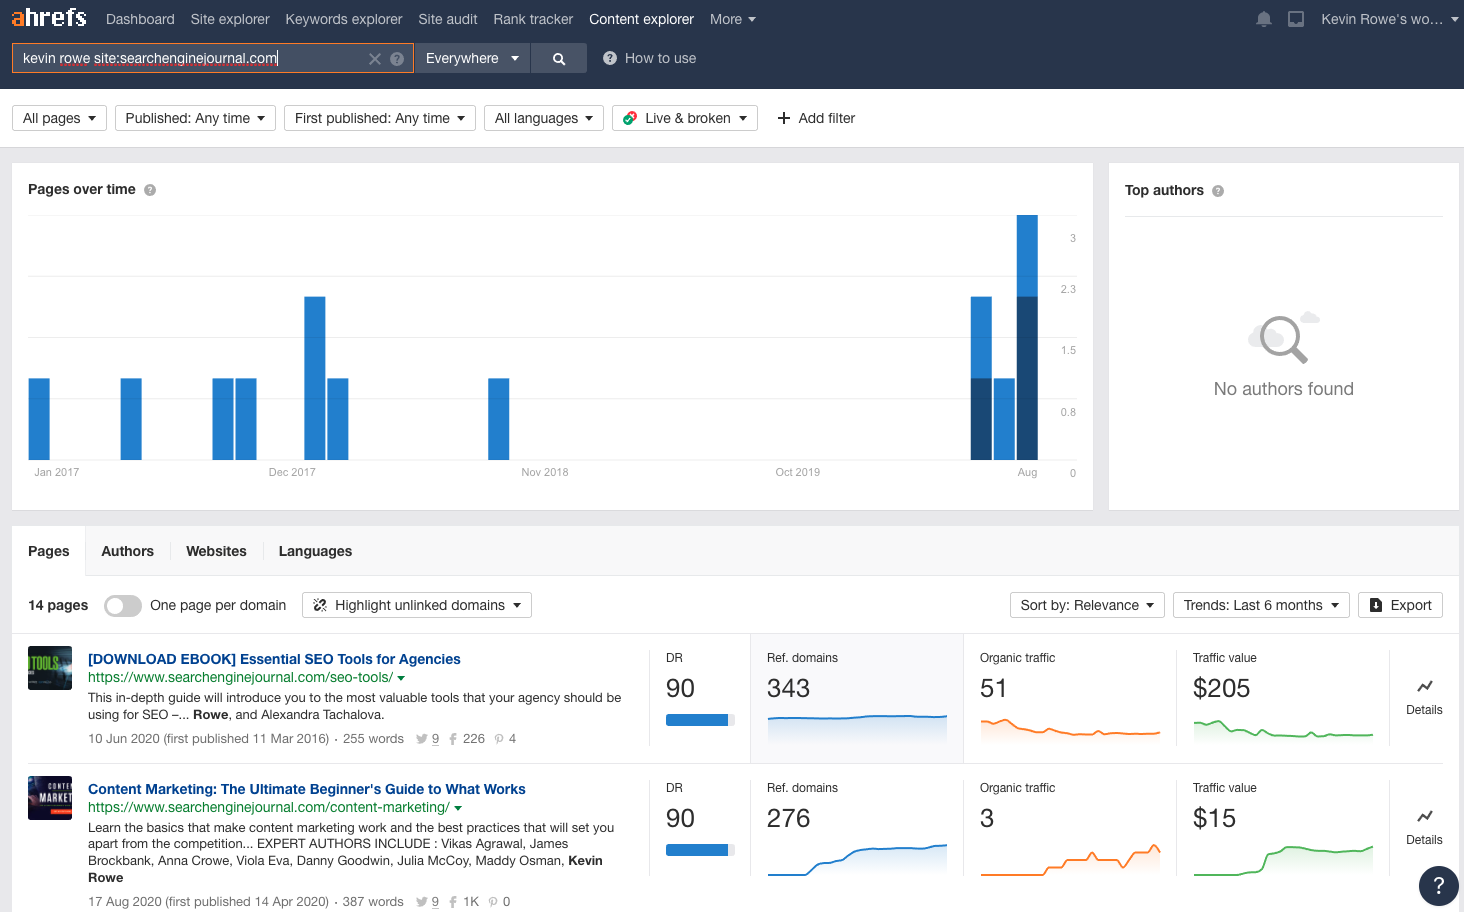 ahrefs content explore for unlinked brand mentions